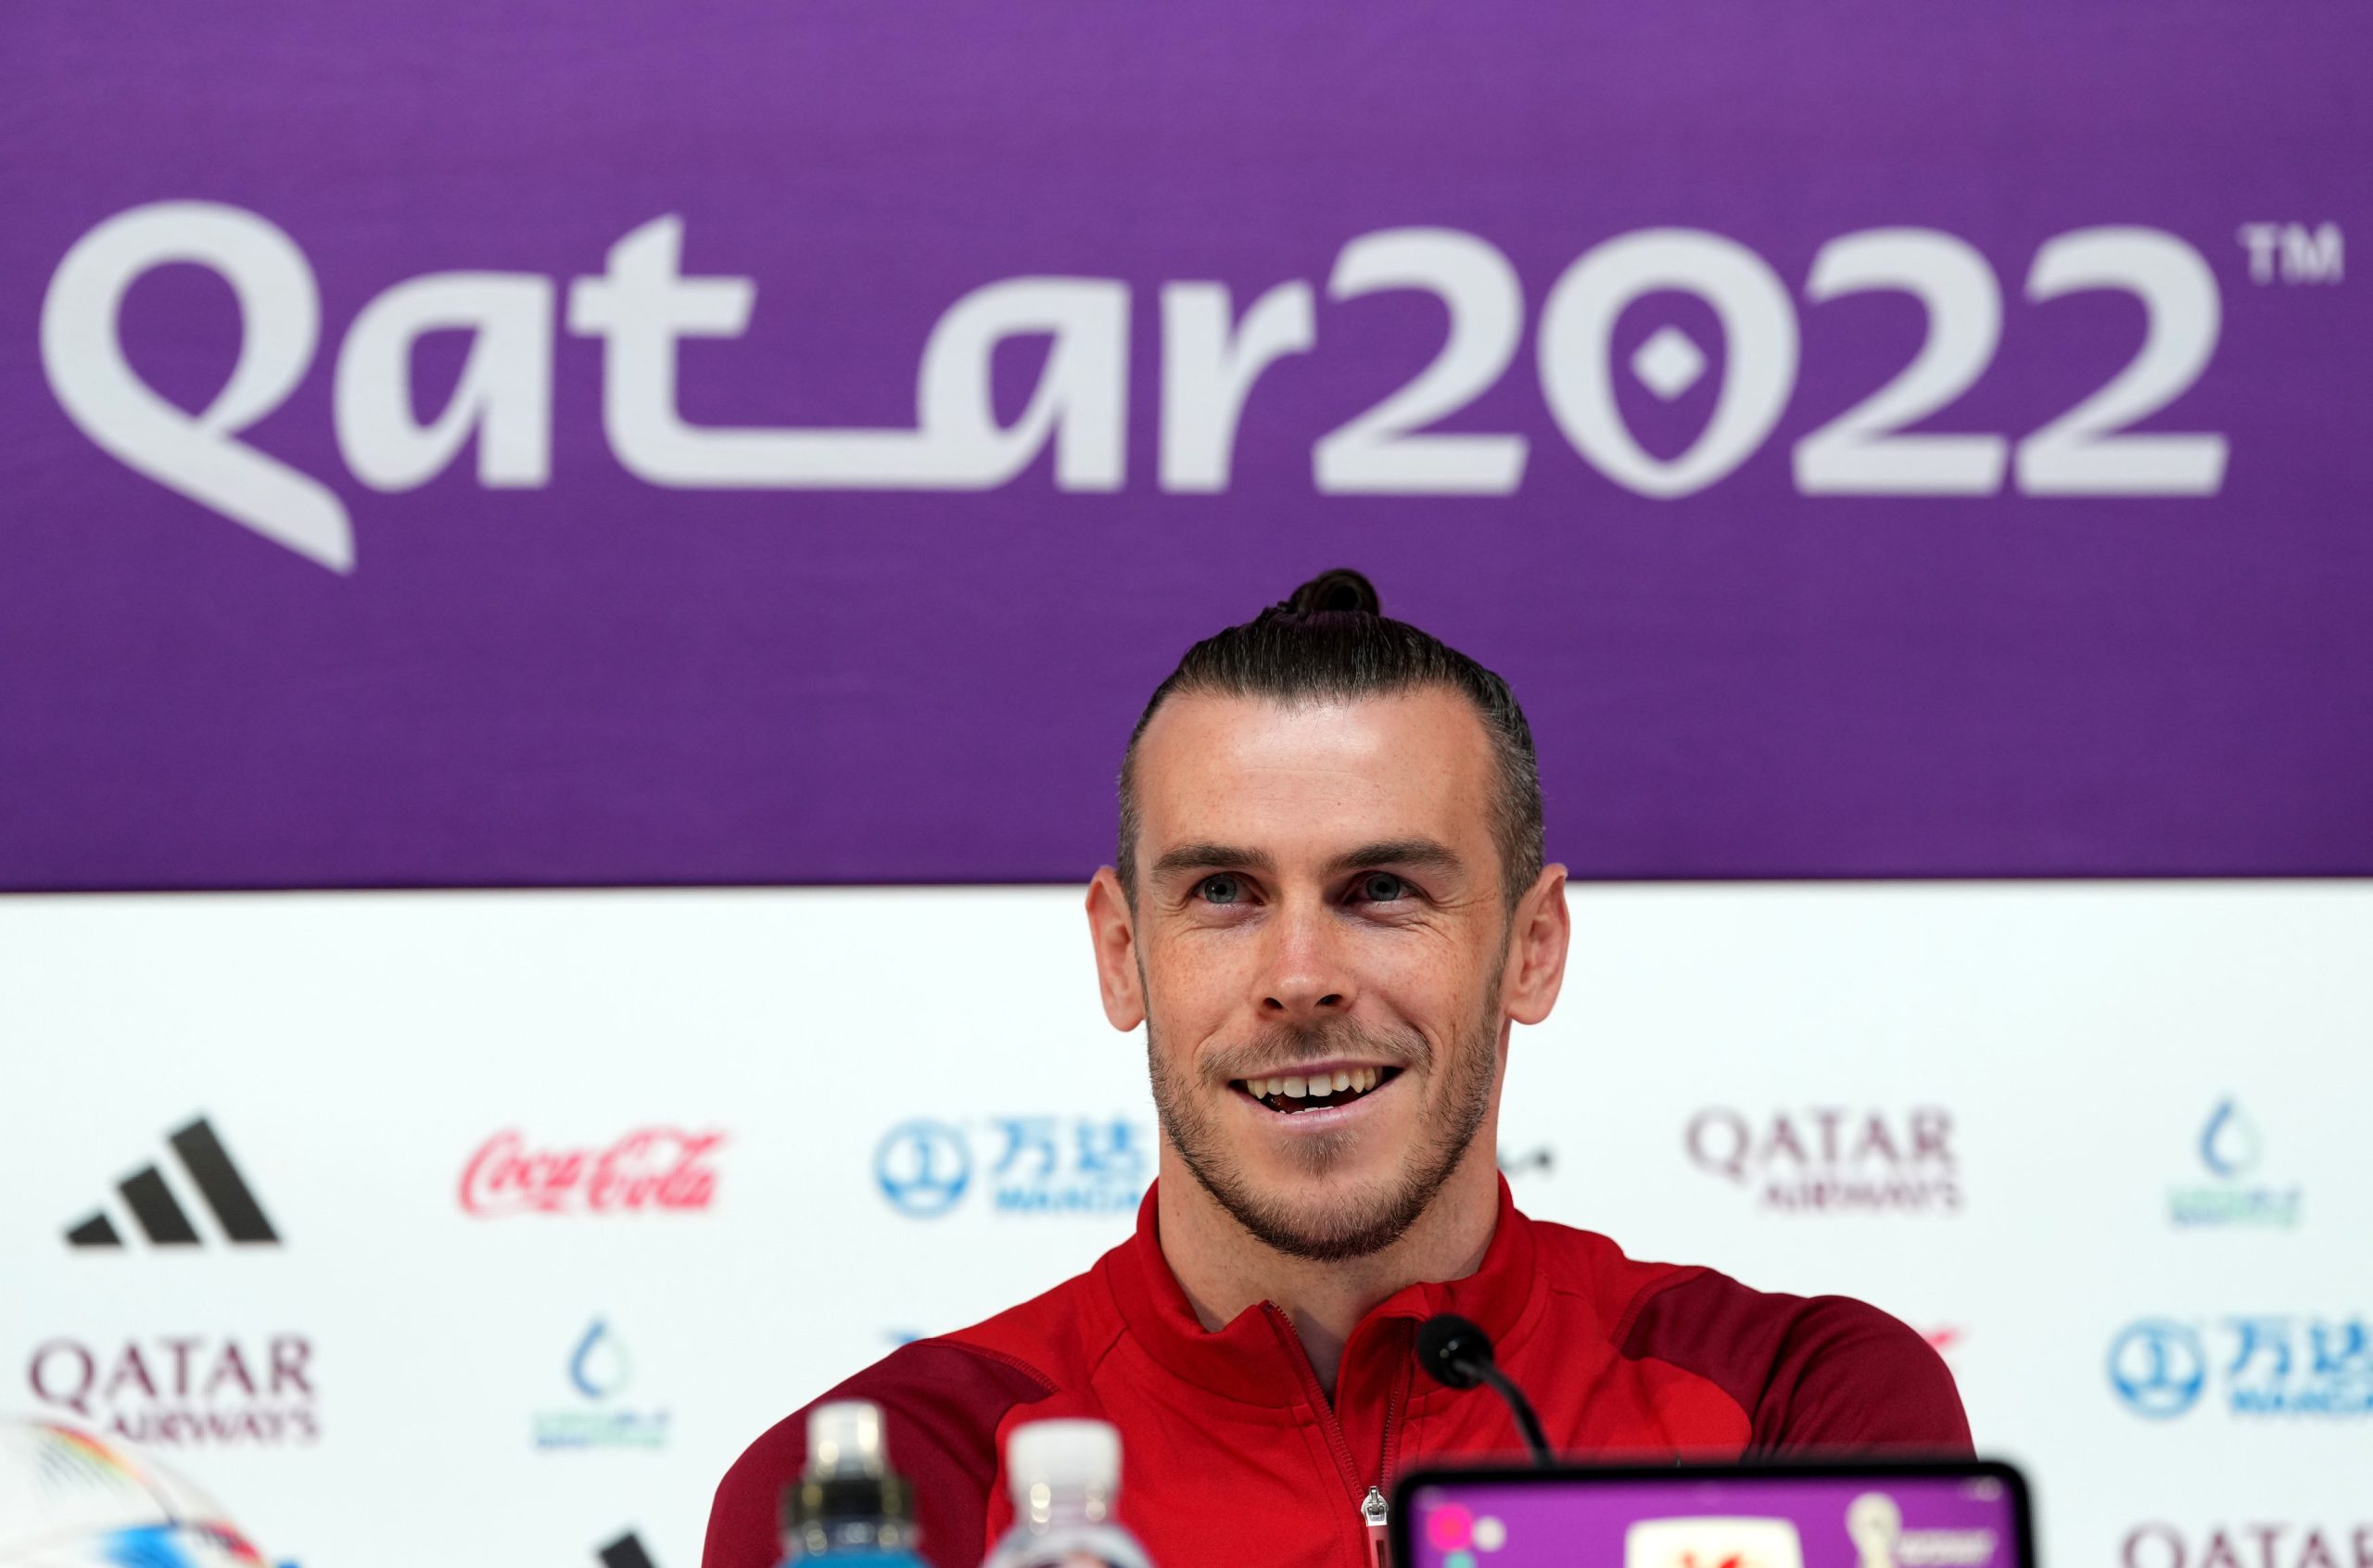 Gareth Bale, part of the Wales predicted lineup, in a press conference